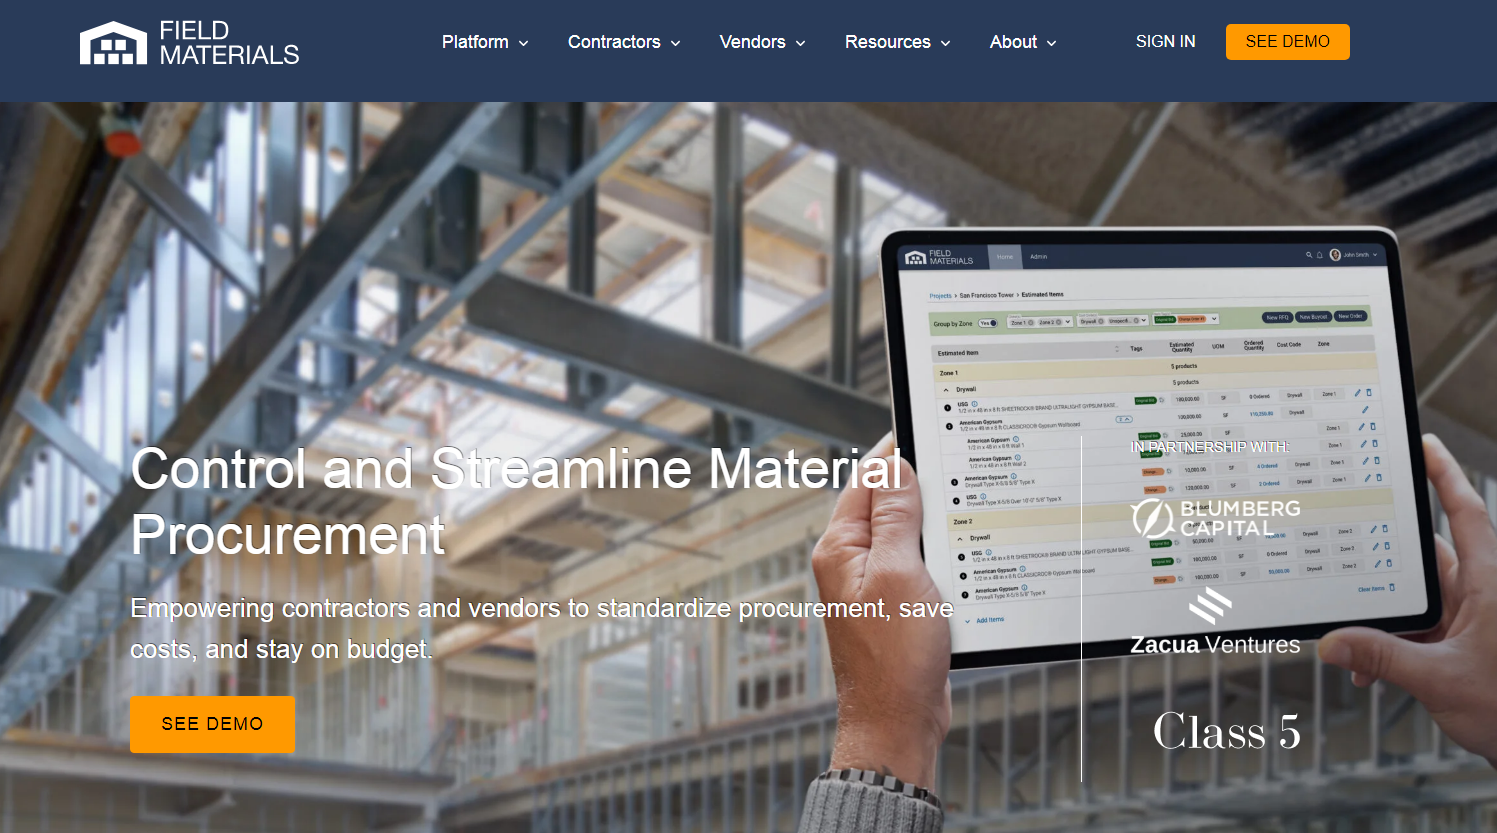 Field Materials Secures $4.6 Million in a Seed Funding Round.